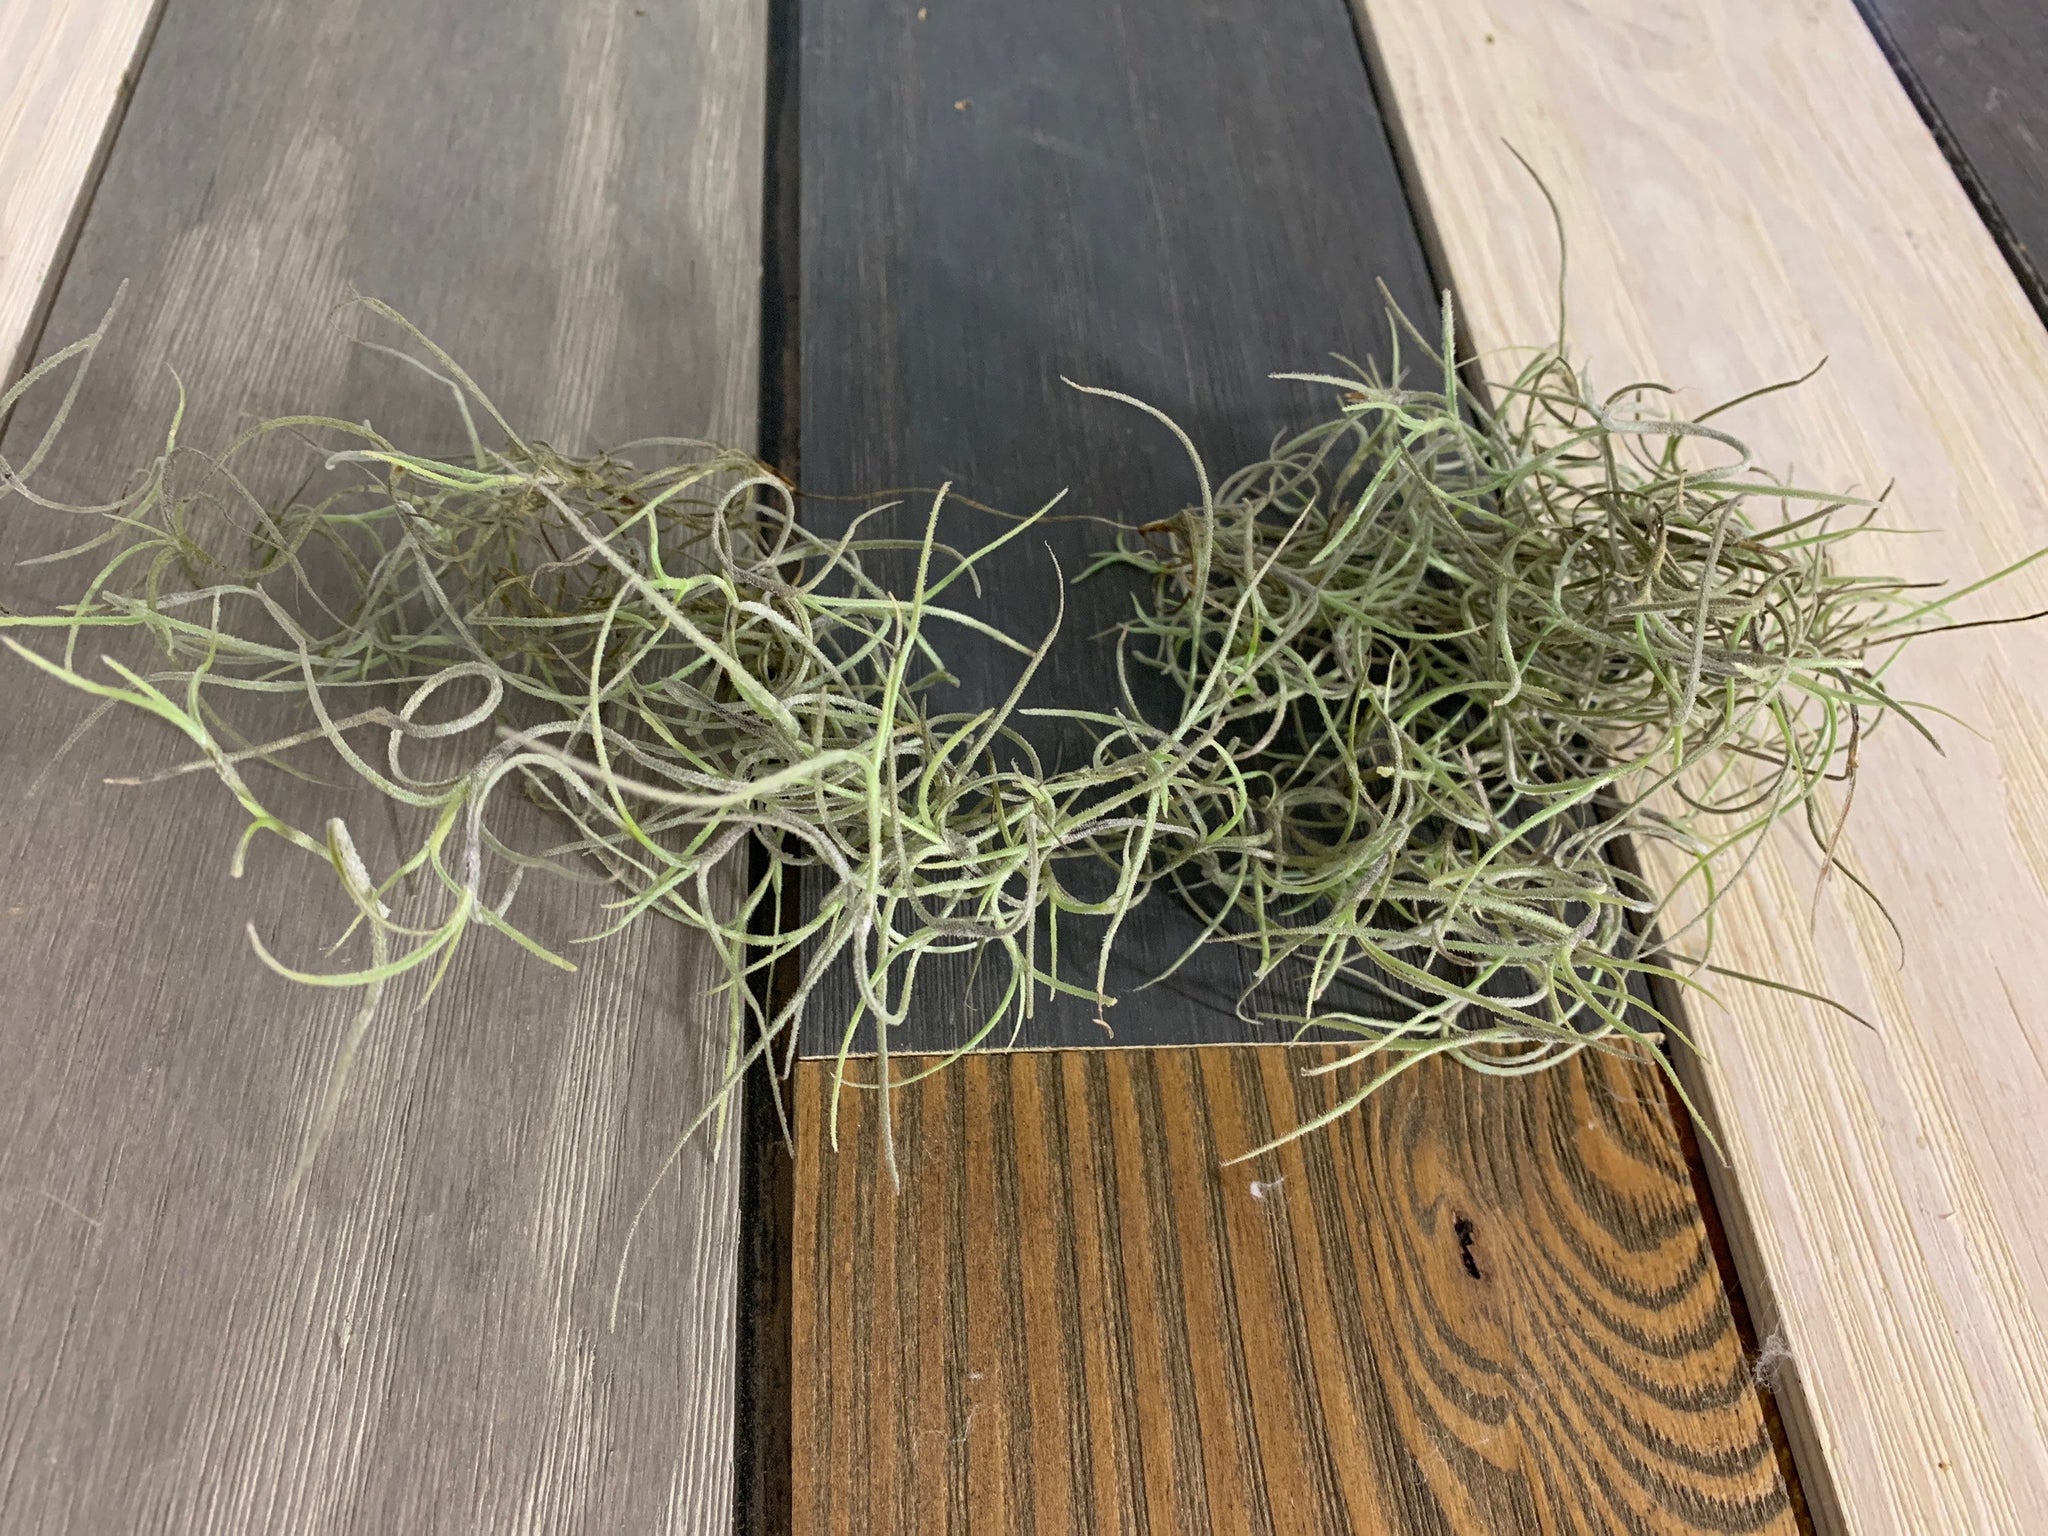 Spanish Moss Plant For Sale In India